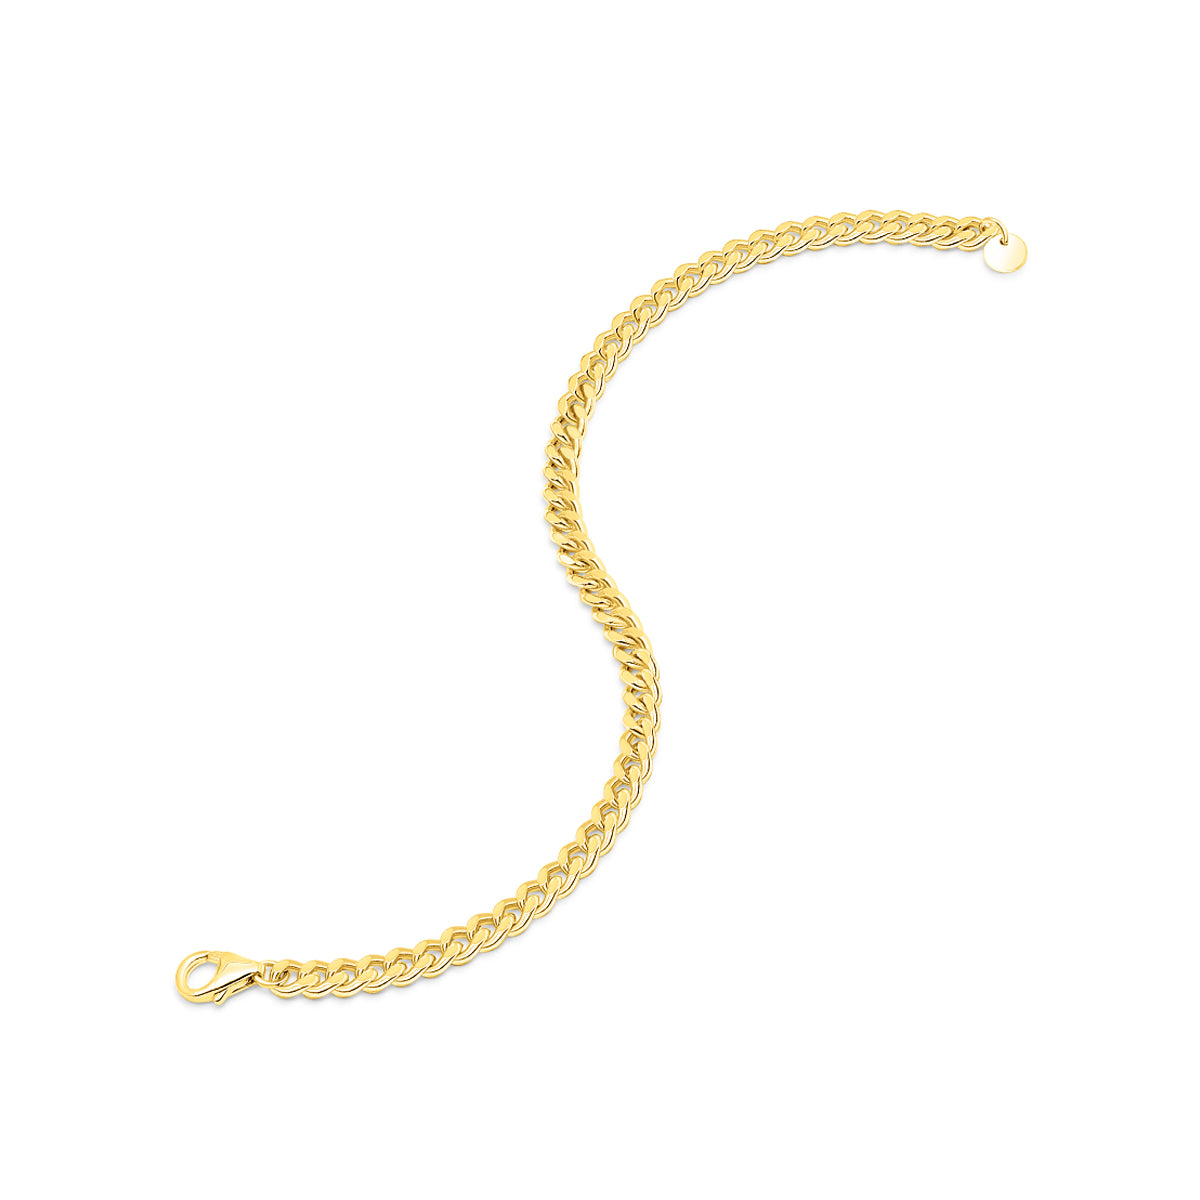 Thin gold plated chain link bracelet